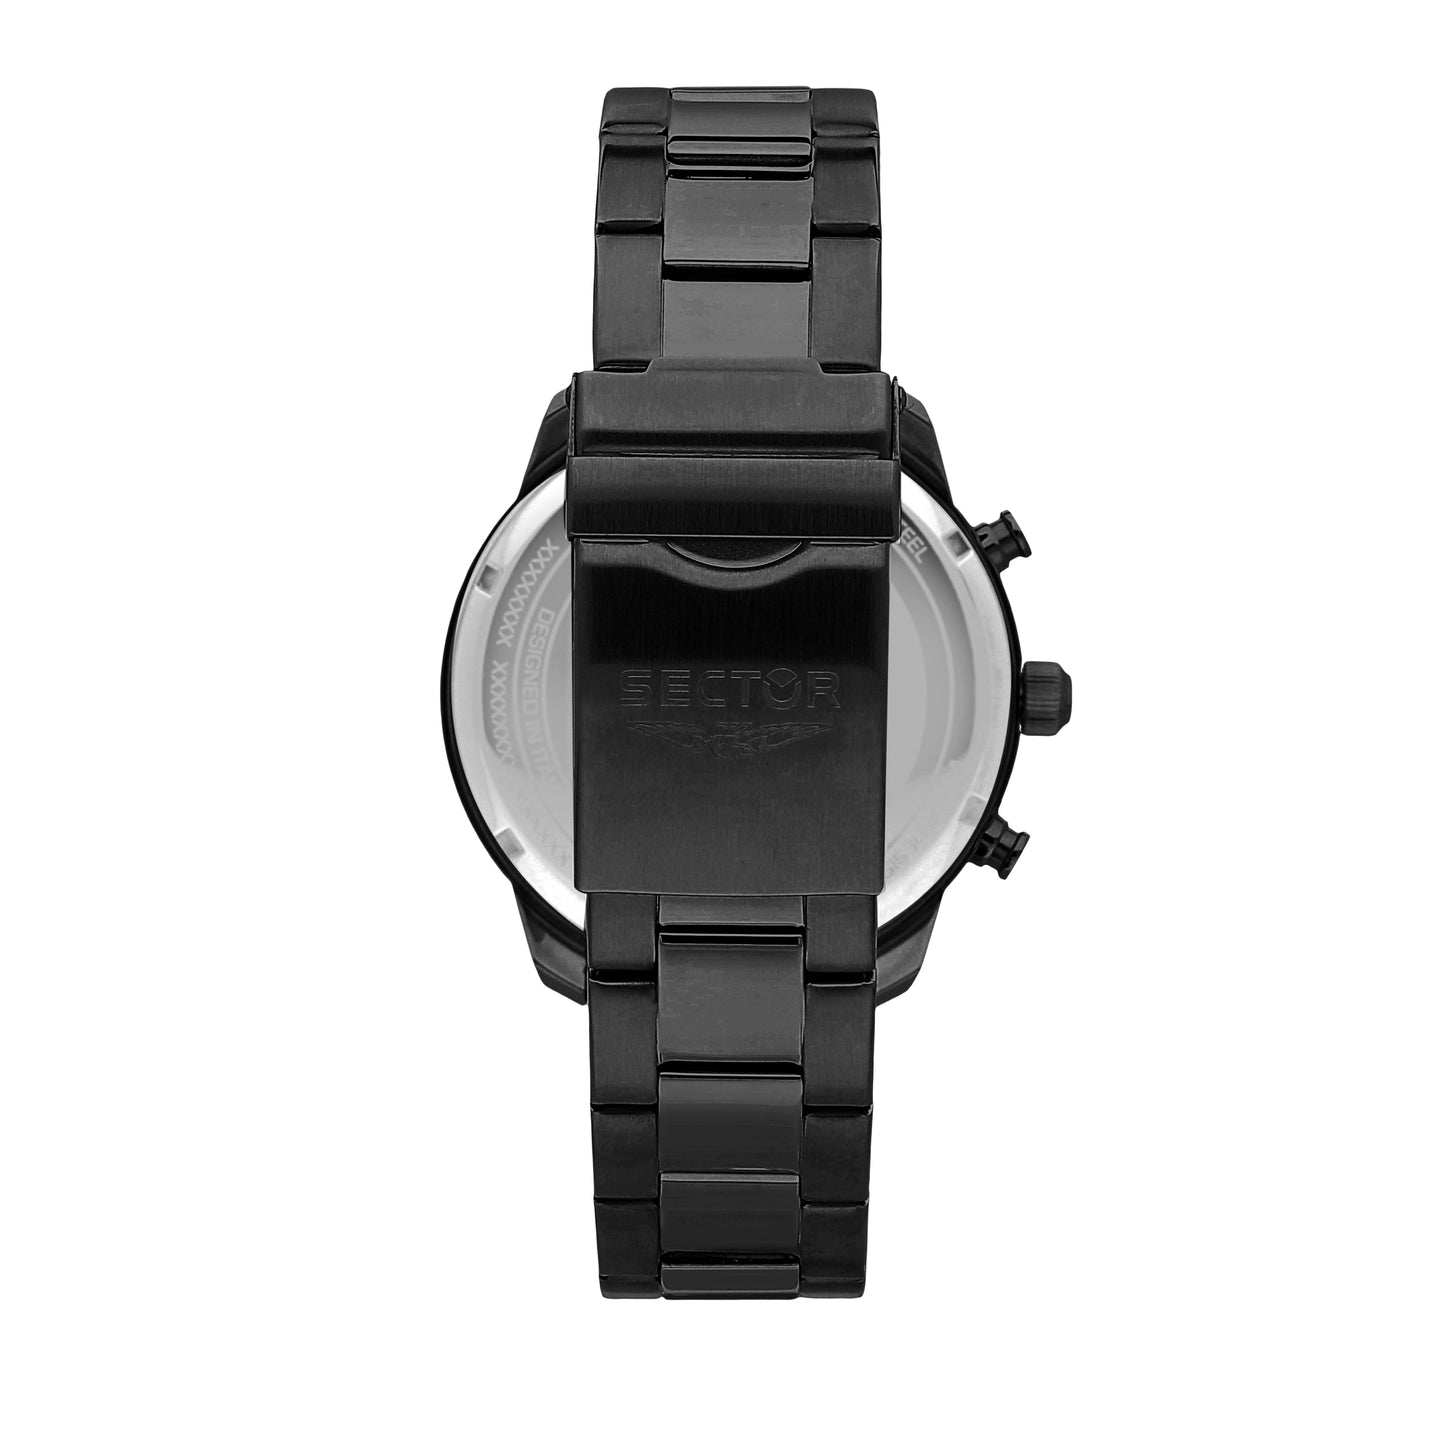 MONTRE HOMME SECTOR OVERSIZE R3273602016